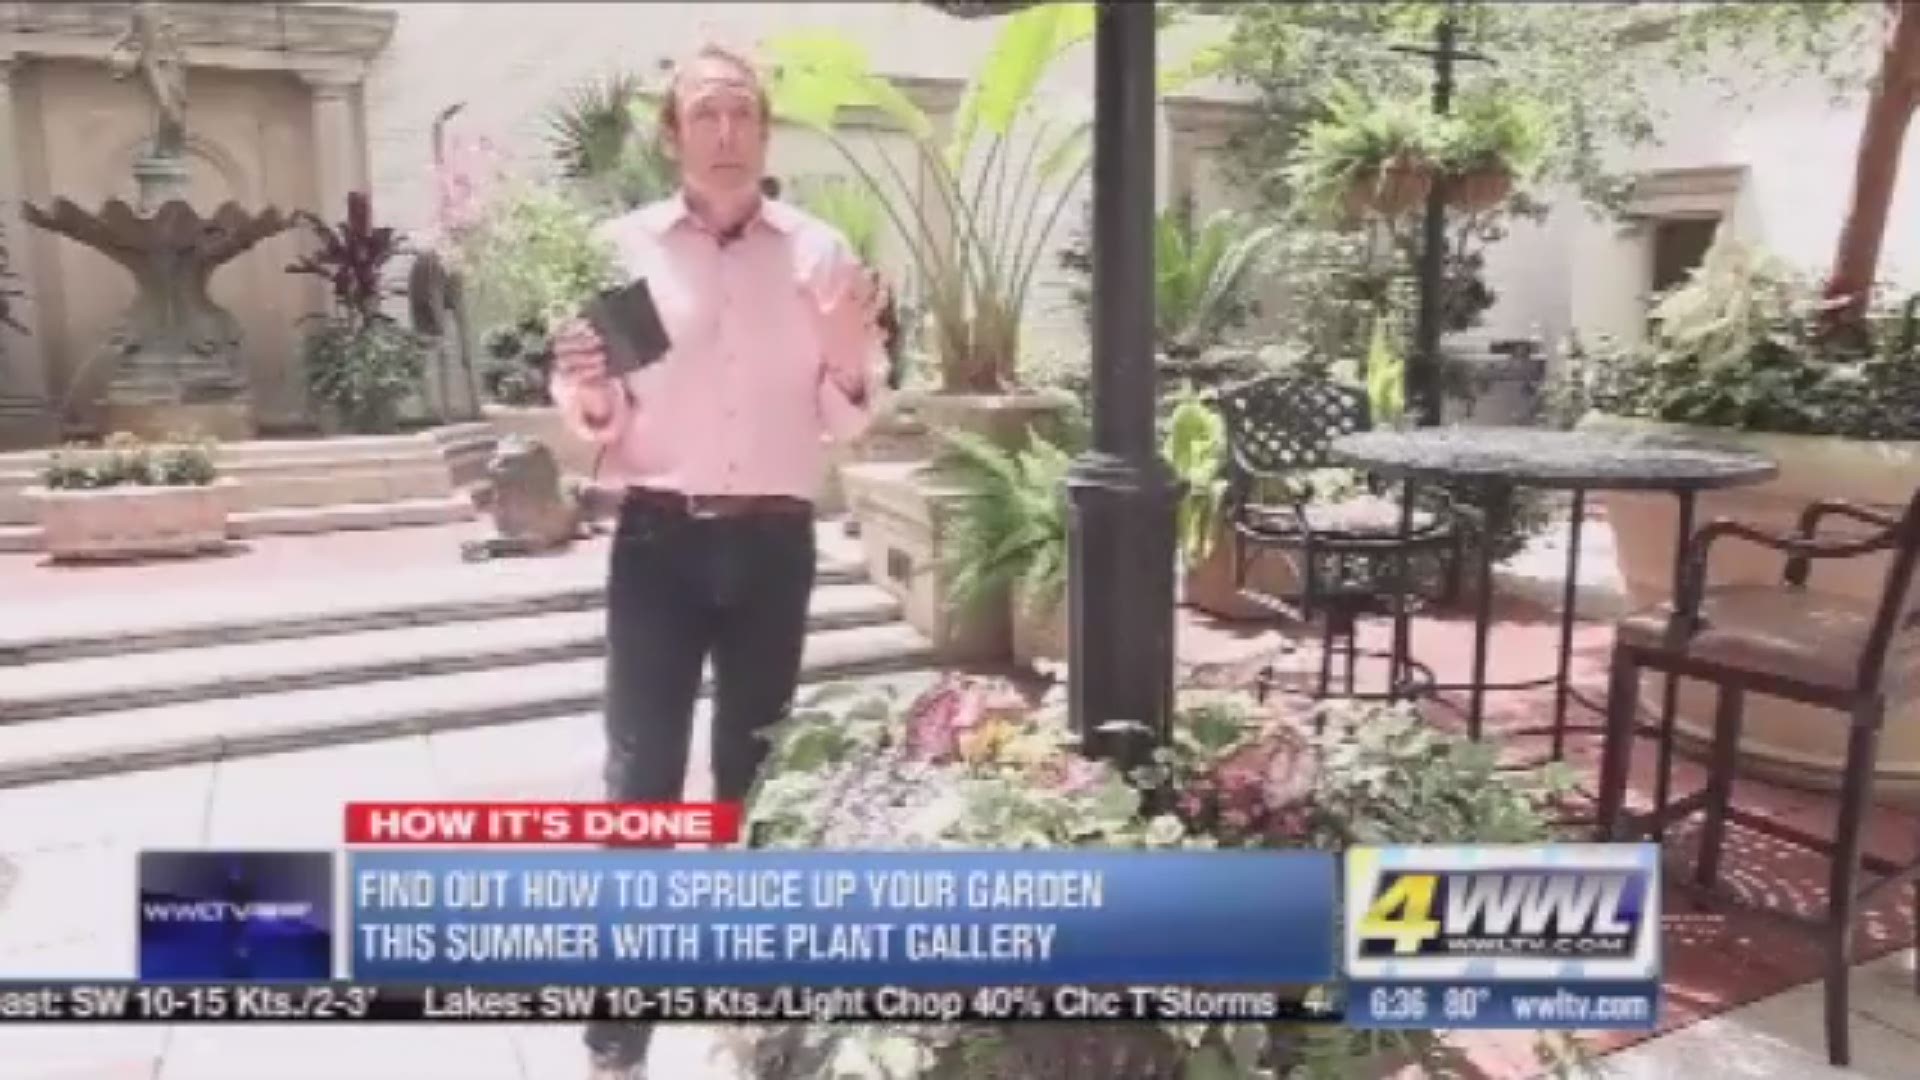 Kenny Rabalais, owner of The Plant Gallery, helps decorate your patio, balcony